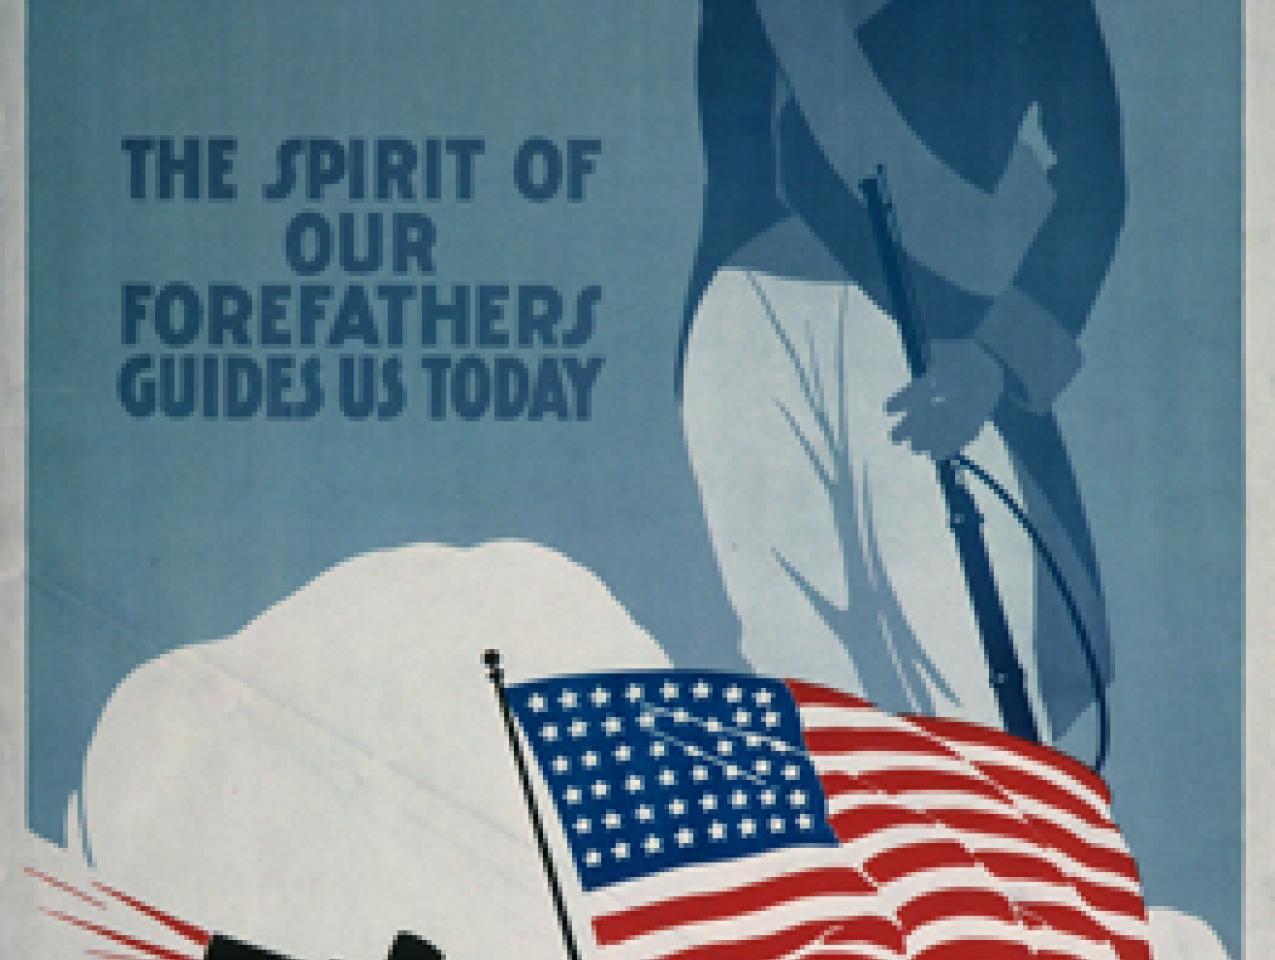 Poster Collection, US 4642, Hoover Institution Archives.